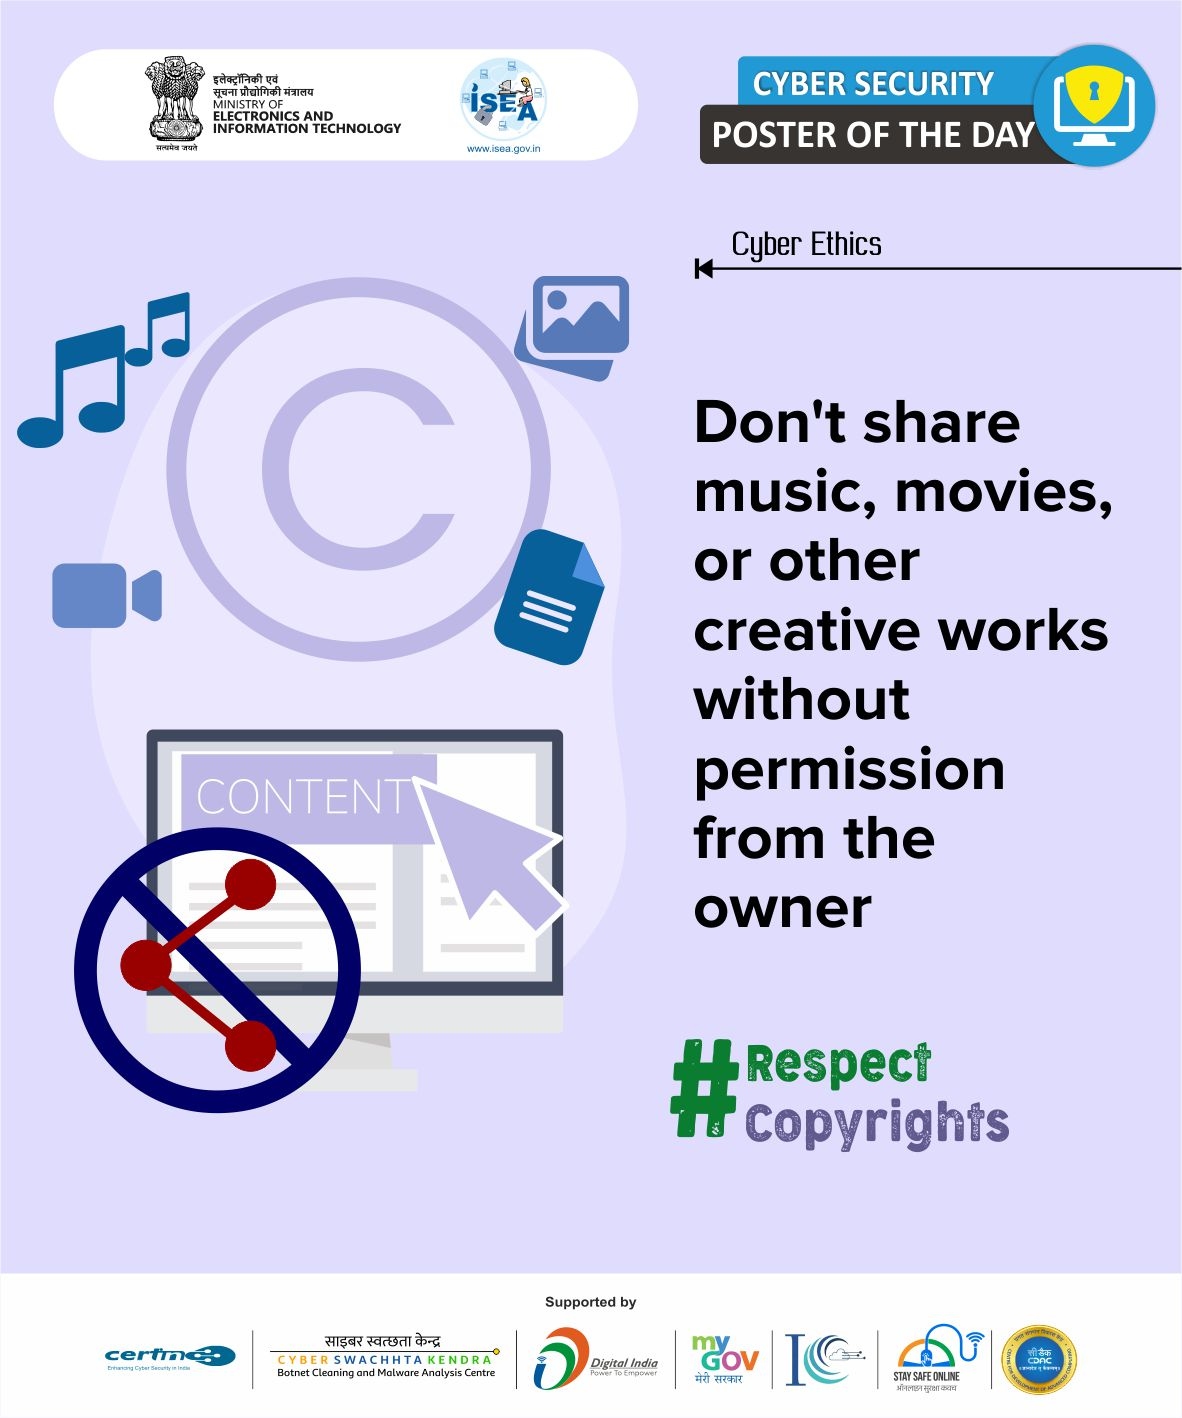 Respect Copyrights